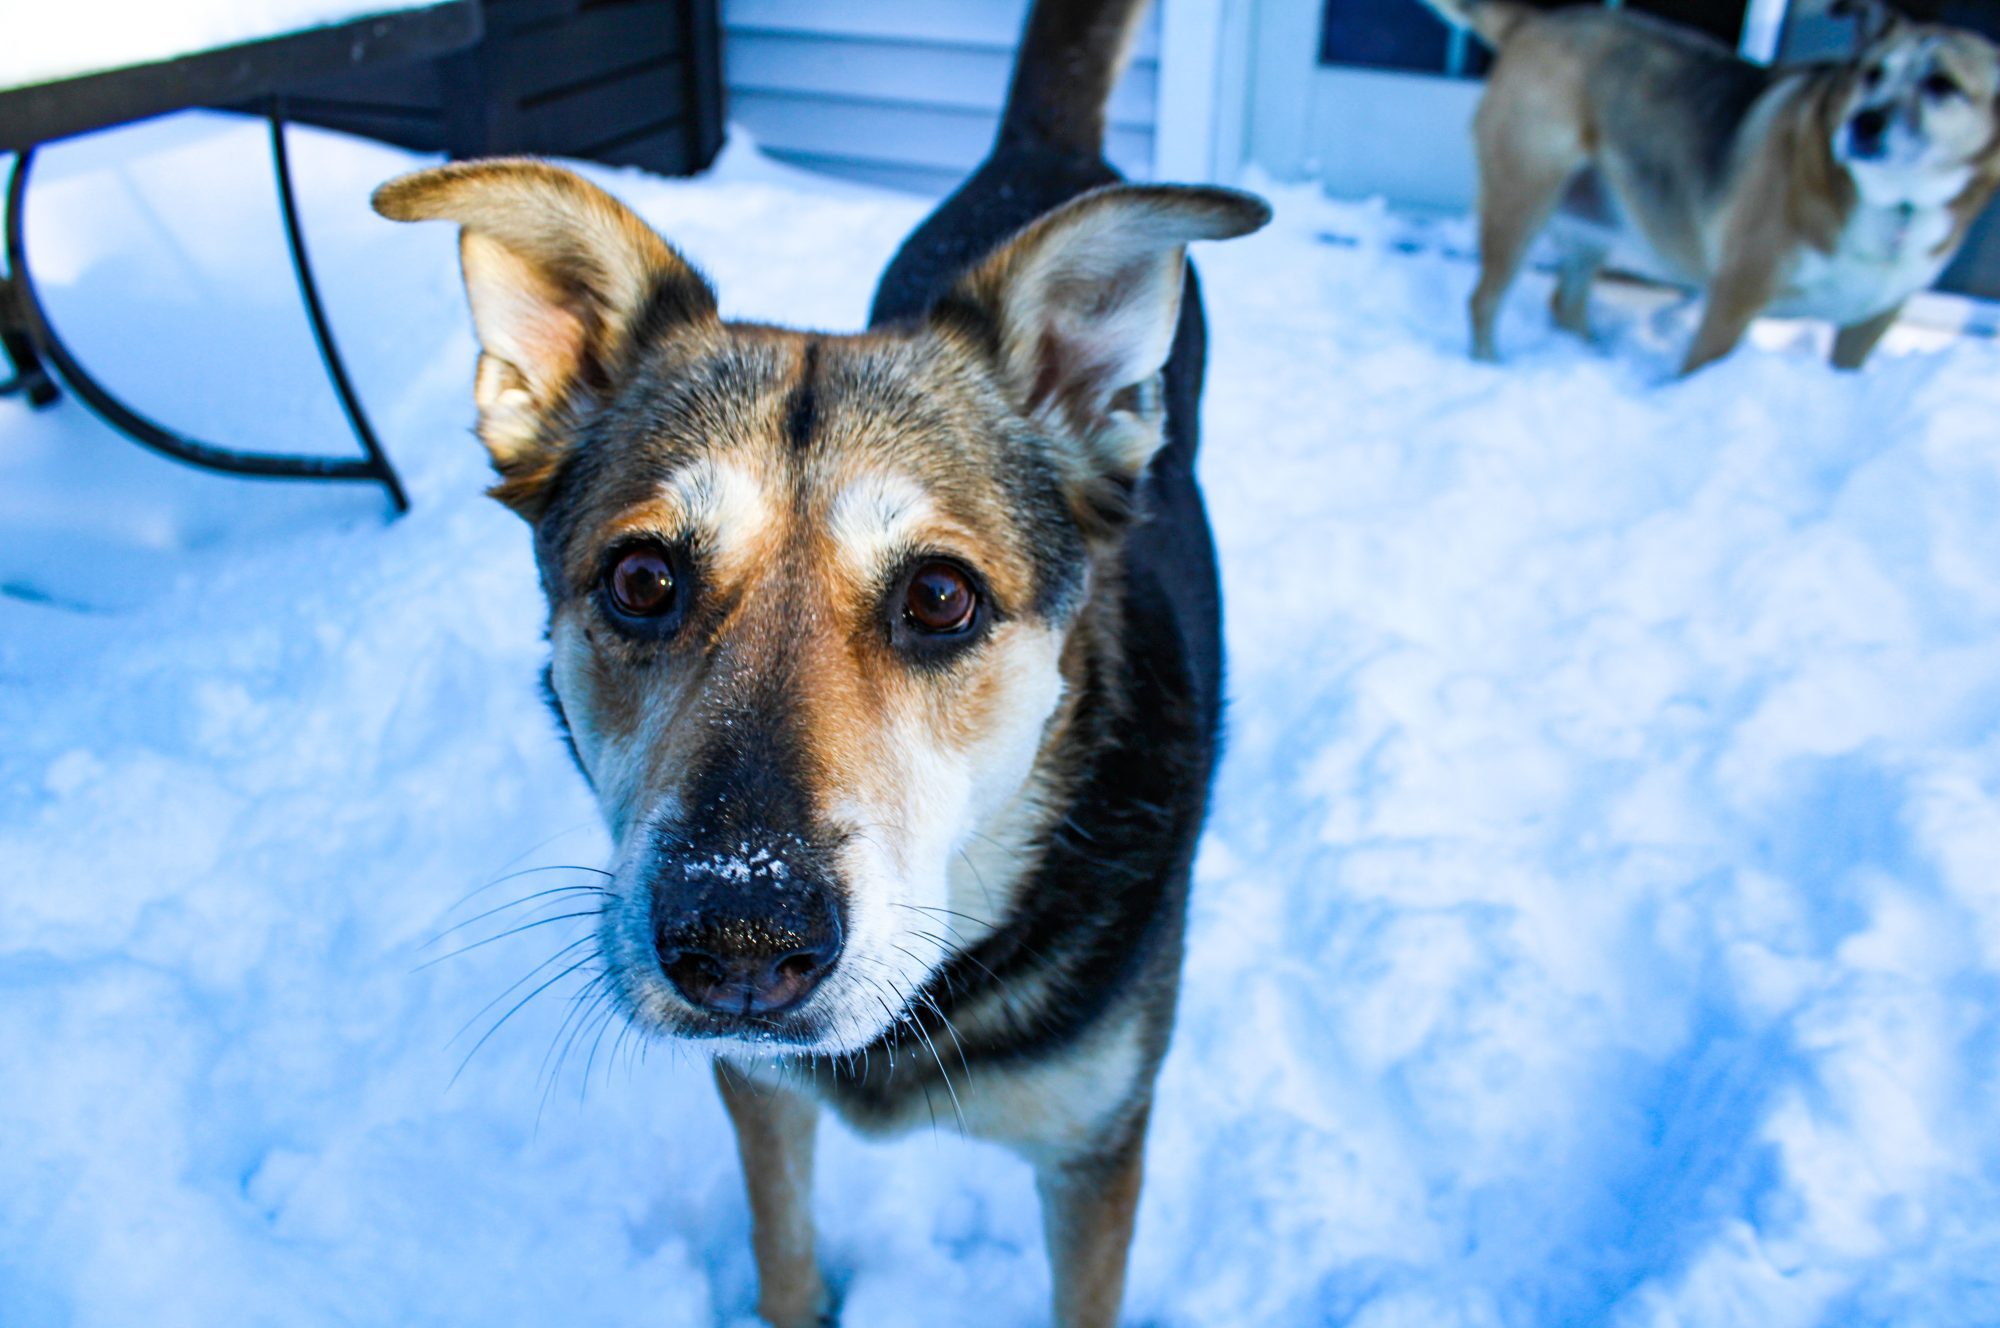 One of the author's two german shepherd mixes. The dog is black, with white and brown markings, and is standing in the snow.